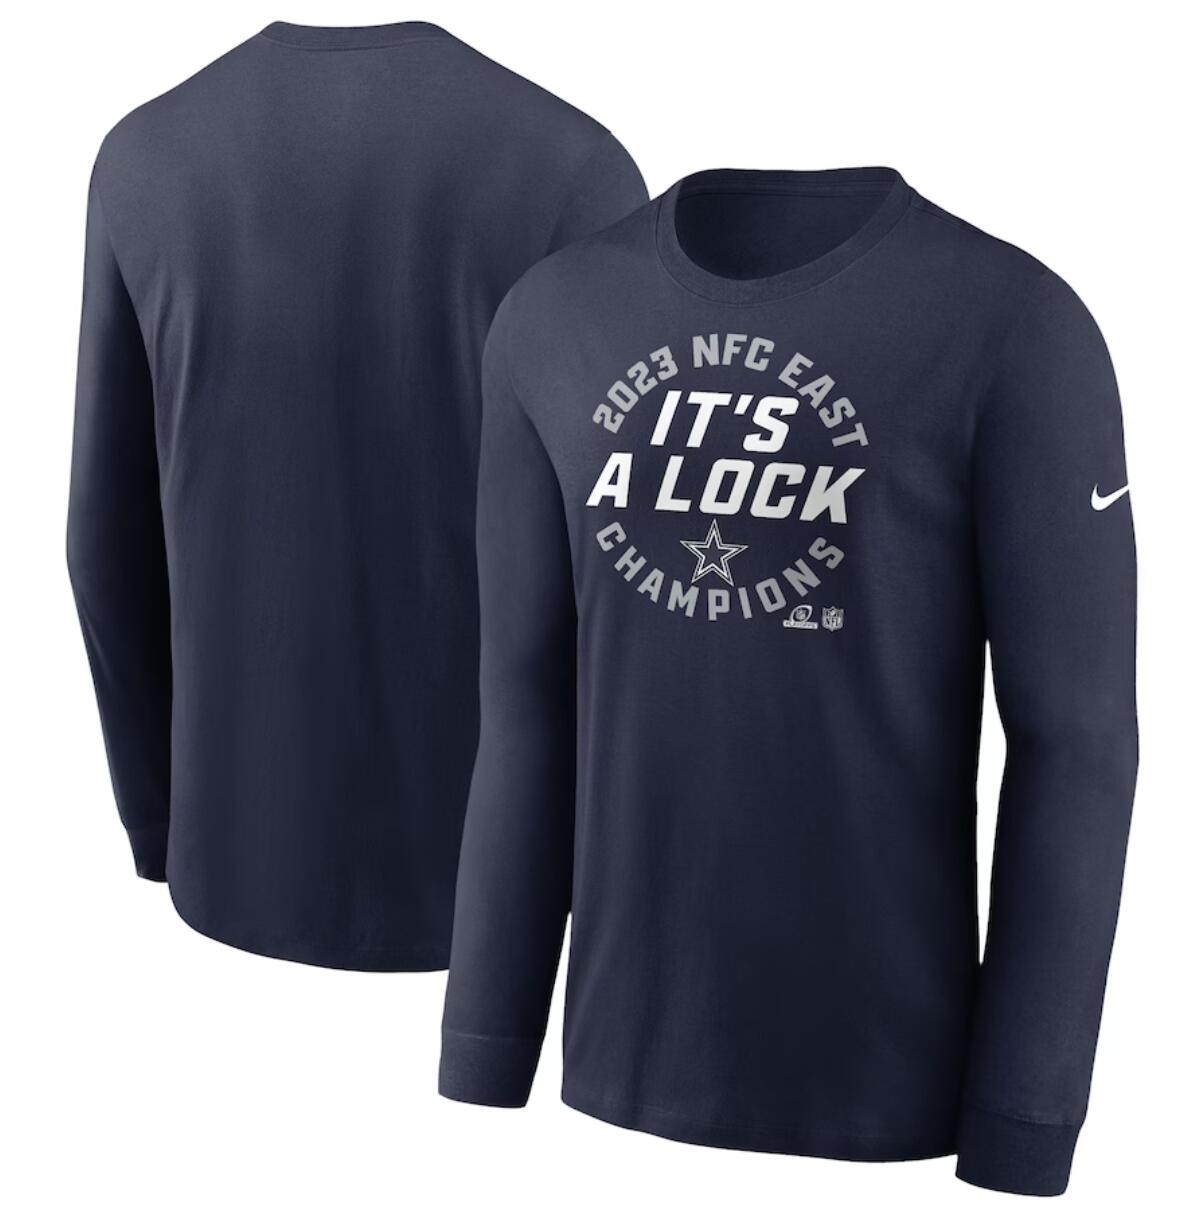 Men's Dallas Cowboys Navy 2023 NFC East Division Champions Locker Room Trophy Collection Long Sleeve T-Shirt